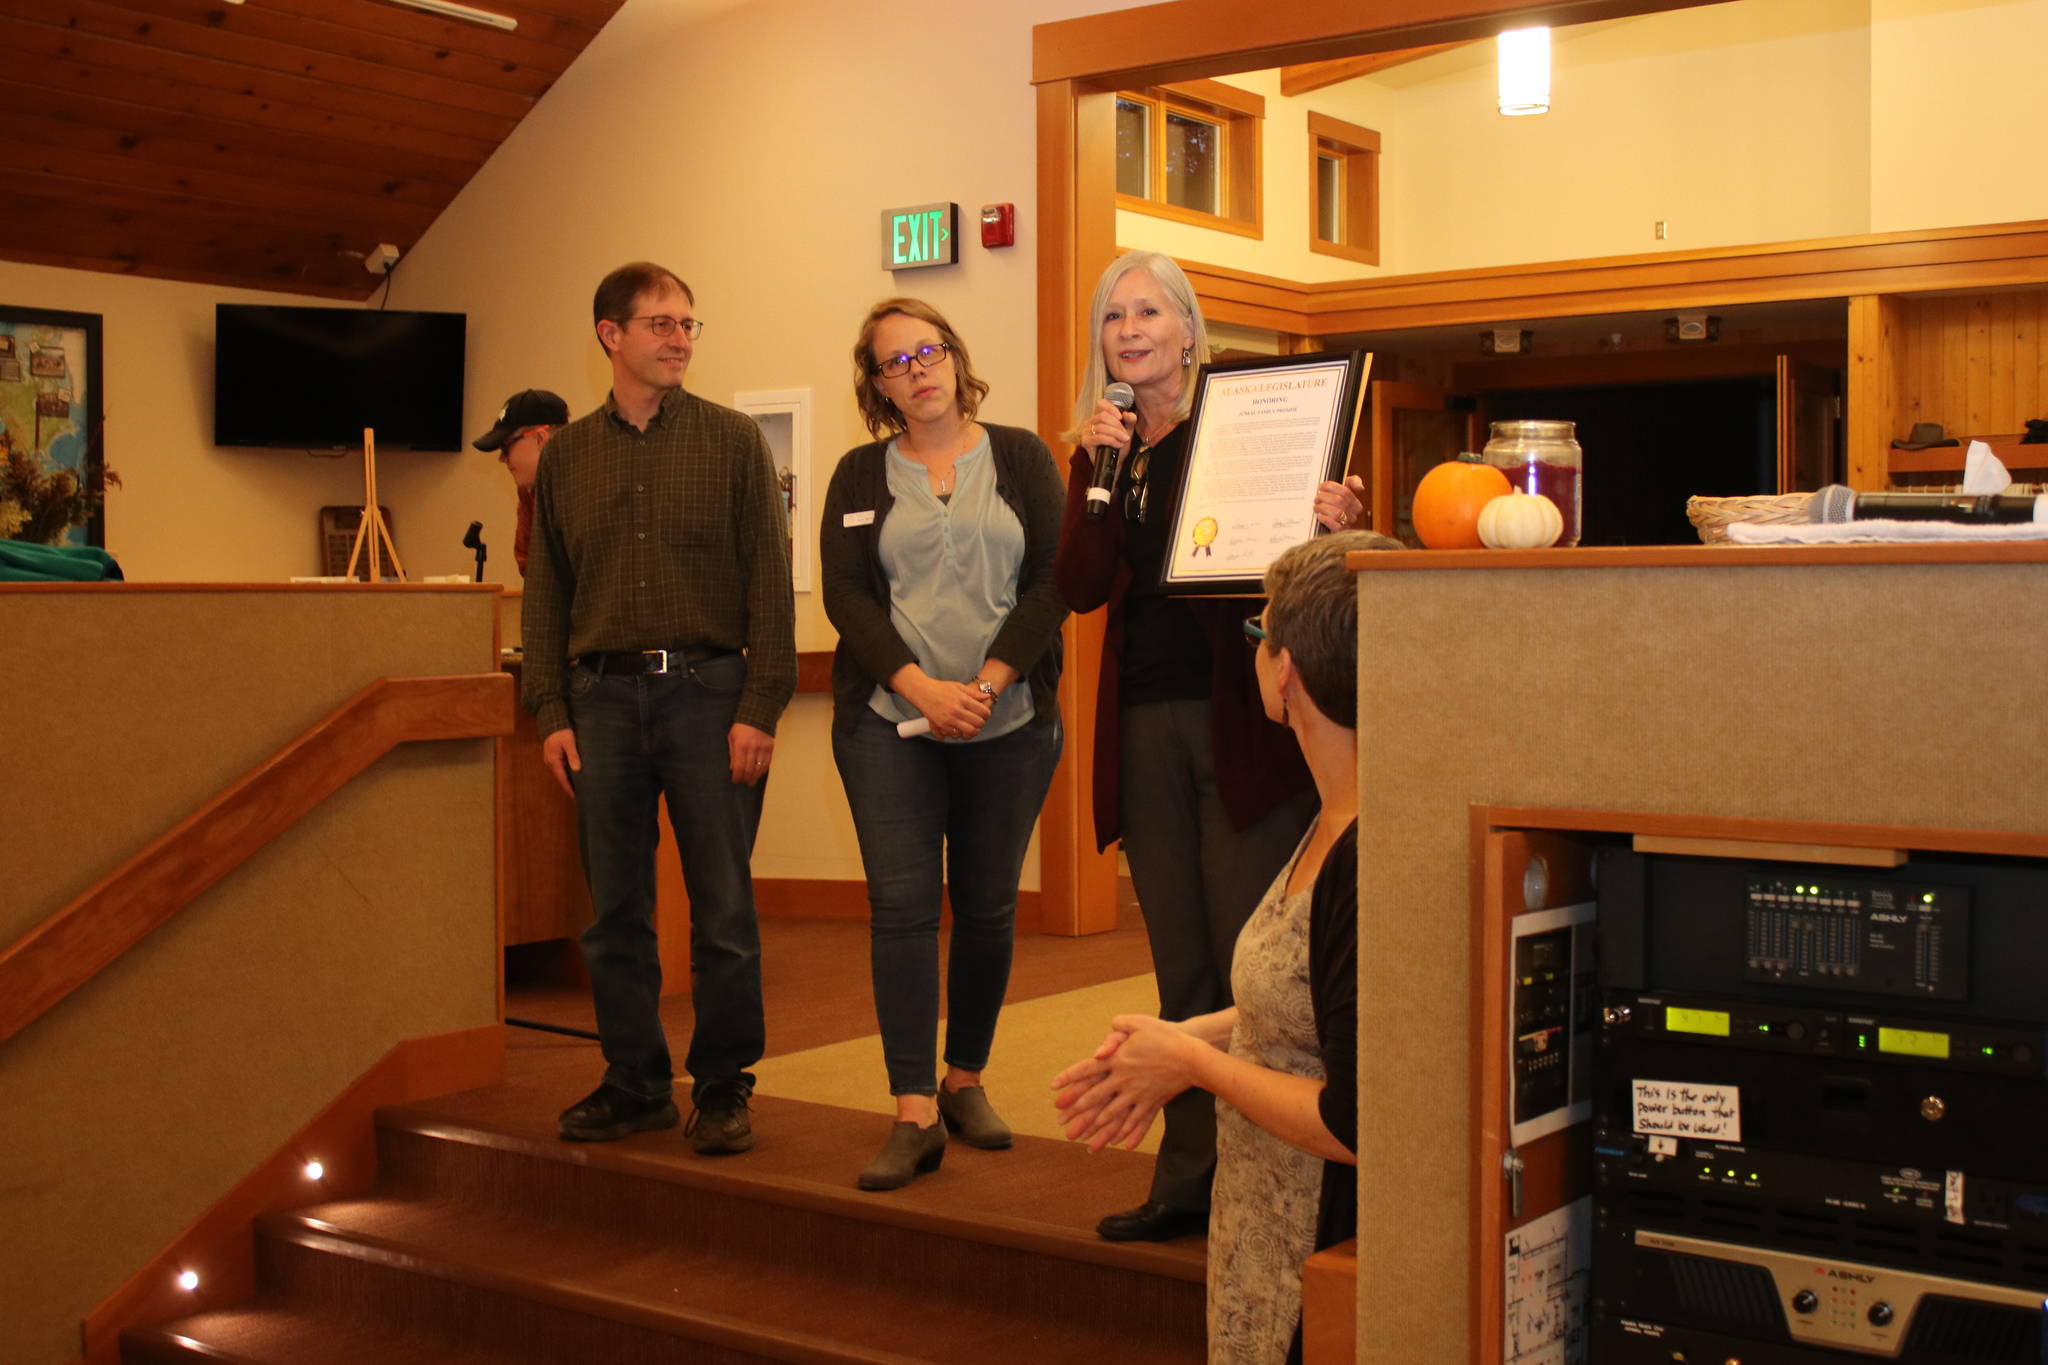 Rep. Andi Story, D-Juneau, left presents a Legislative Citation to Family Promise of Juneau at Chapel by the Lake on Sunday, Oct. 20, 2019. Standing with her are Family Promise of Juneau Executive Director Katherine Carlson and Sen. Jesse Kiehl, D-Juneau. (Courtesy photo | Family Promise of Juneau)